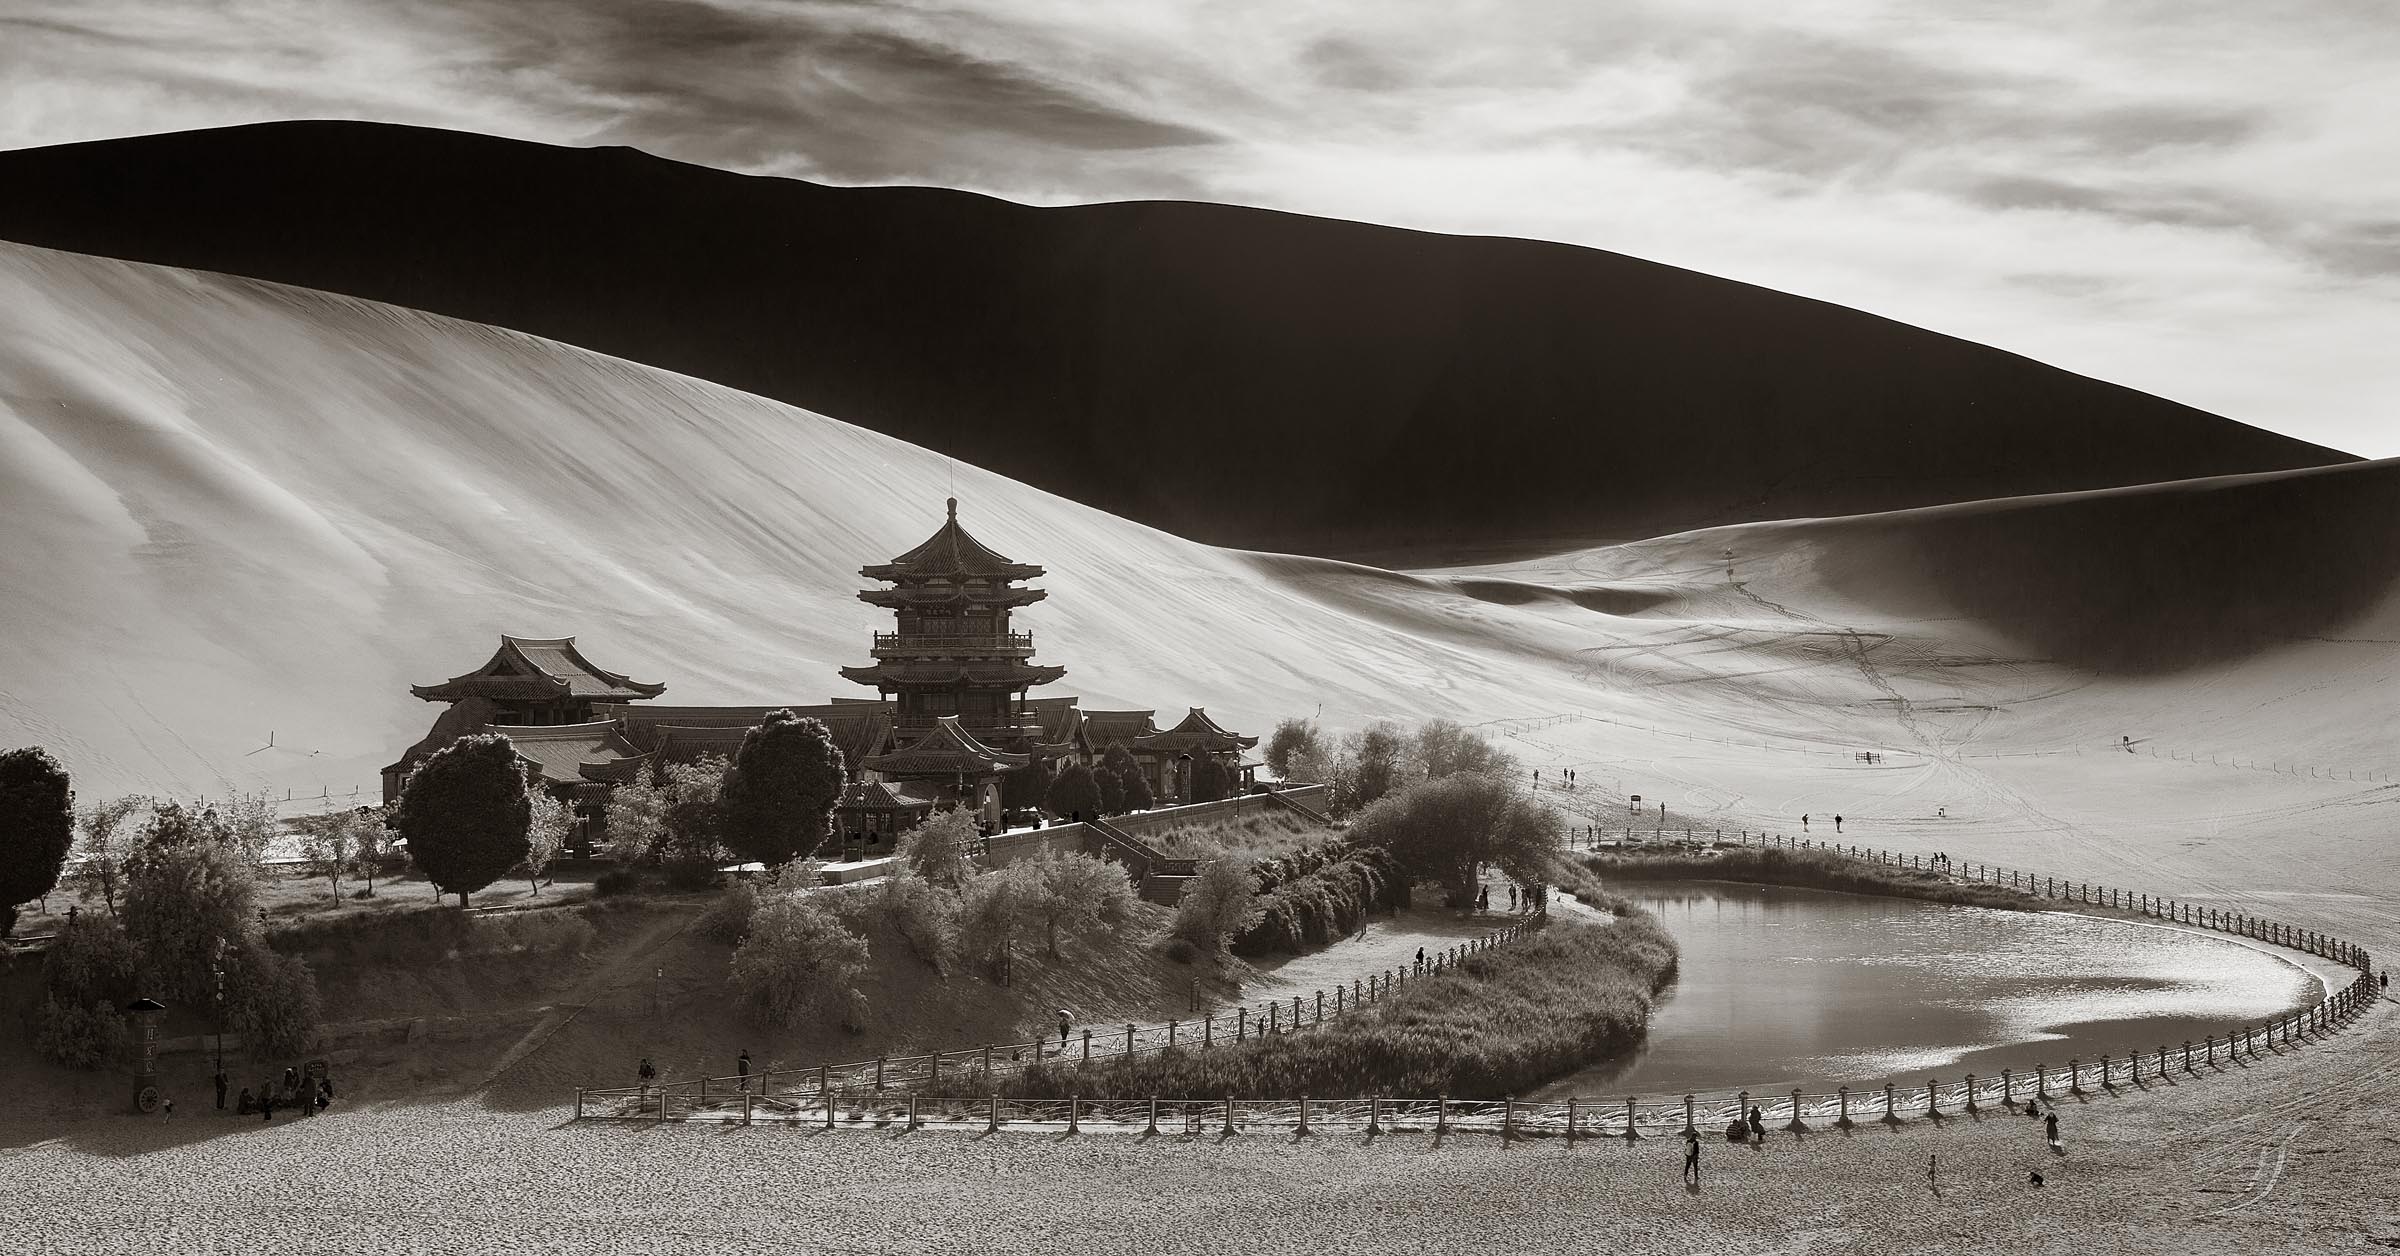 An oasis in Donhuan, China known as Crescent Lake.